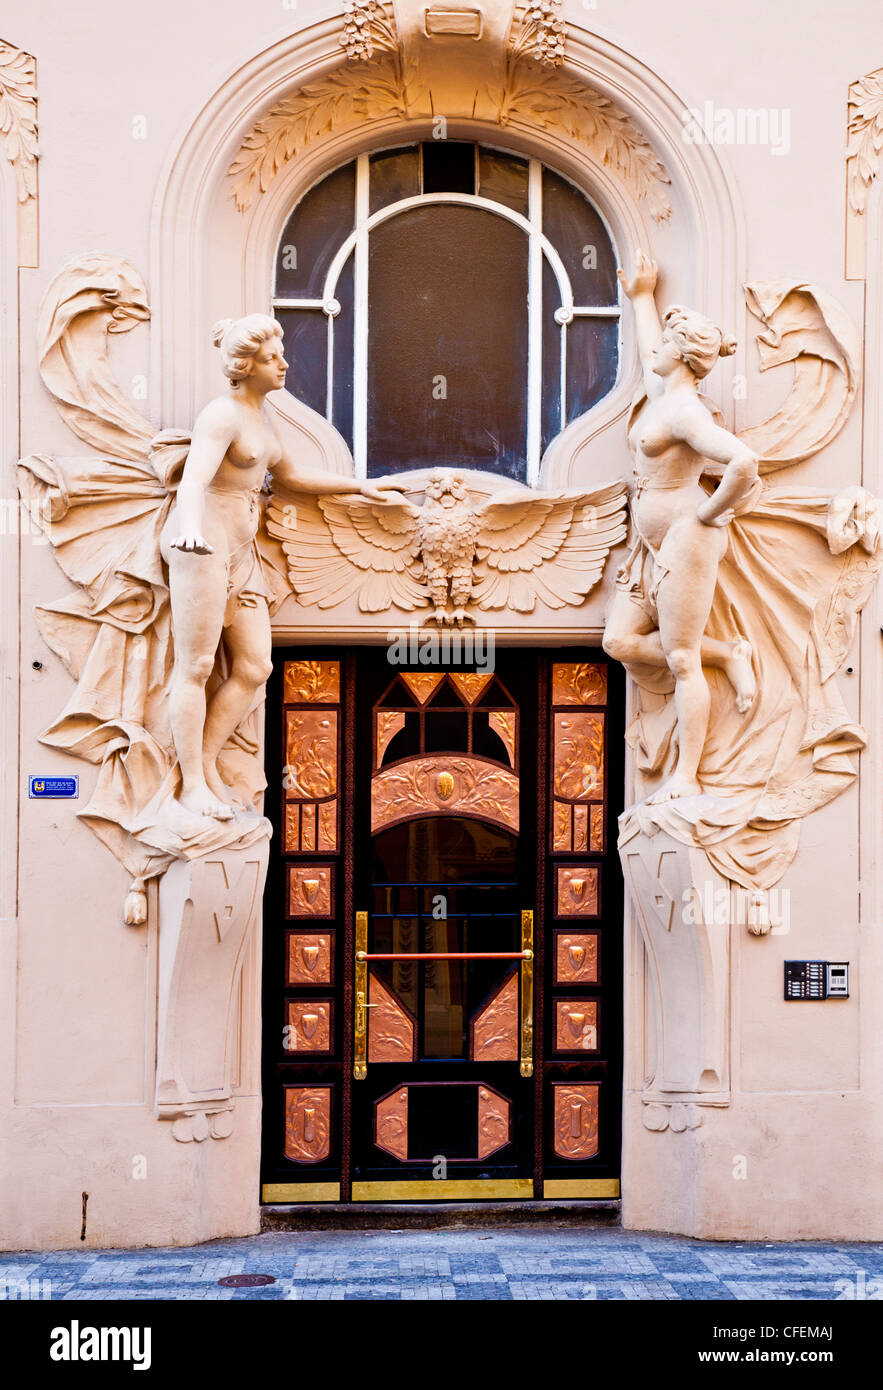 Two female sculptures over a door in the Old Town of Prague, Czech Republic Stock Photo